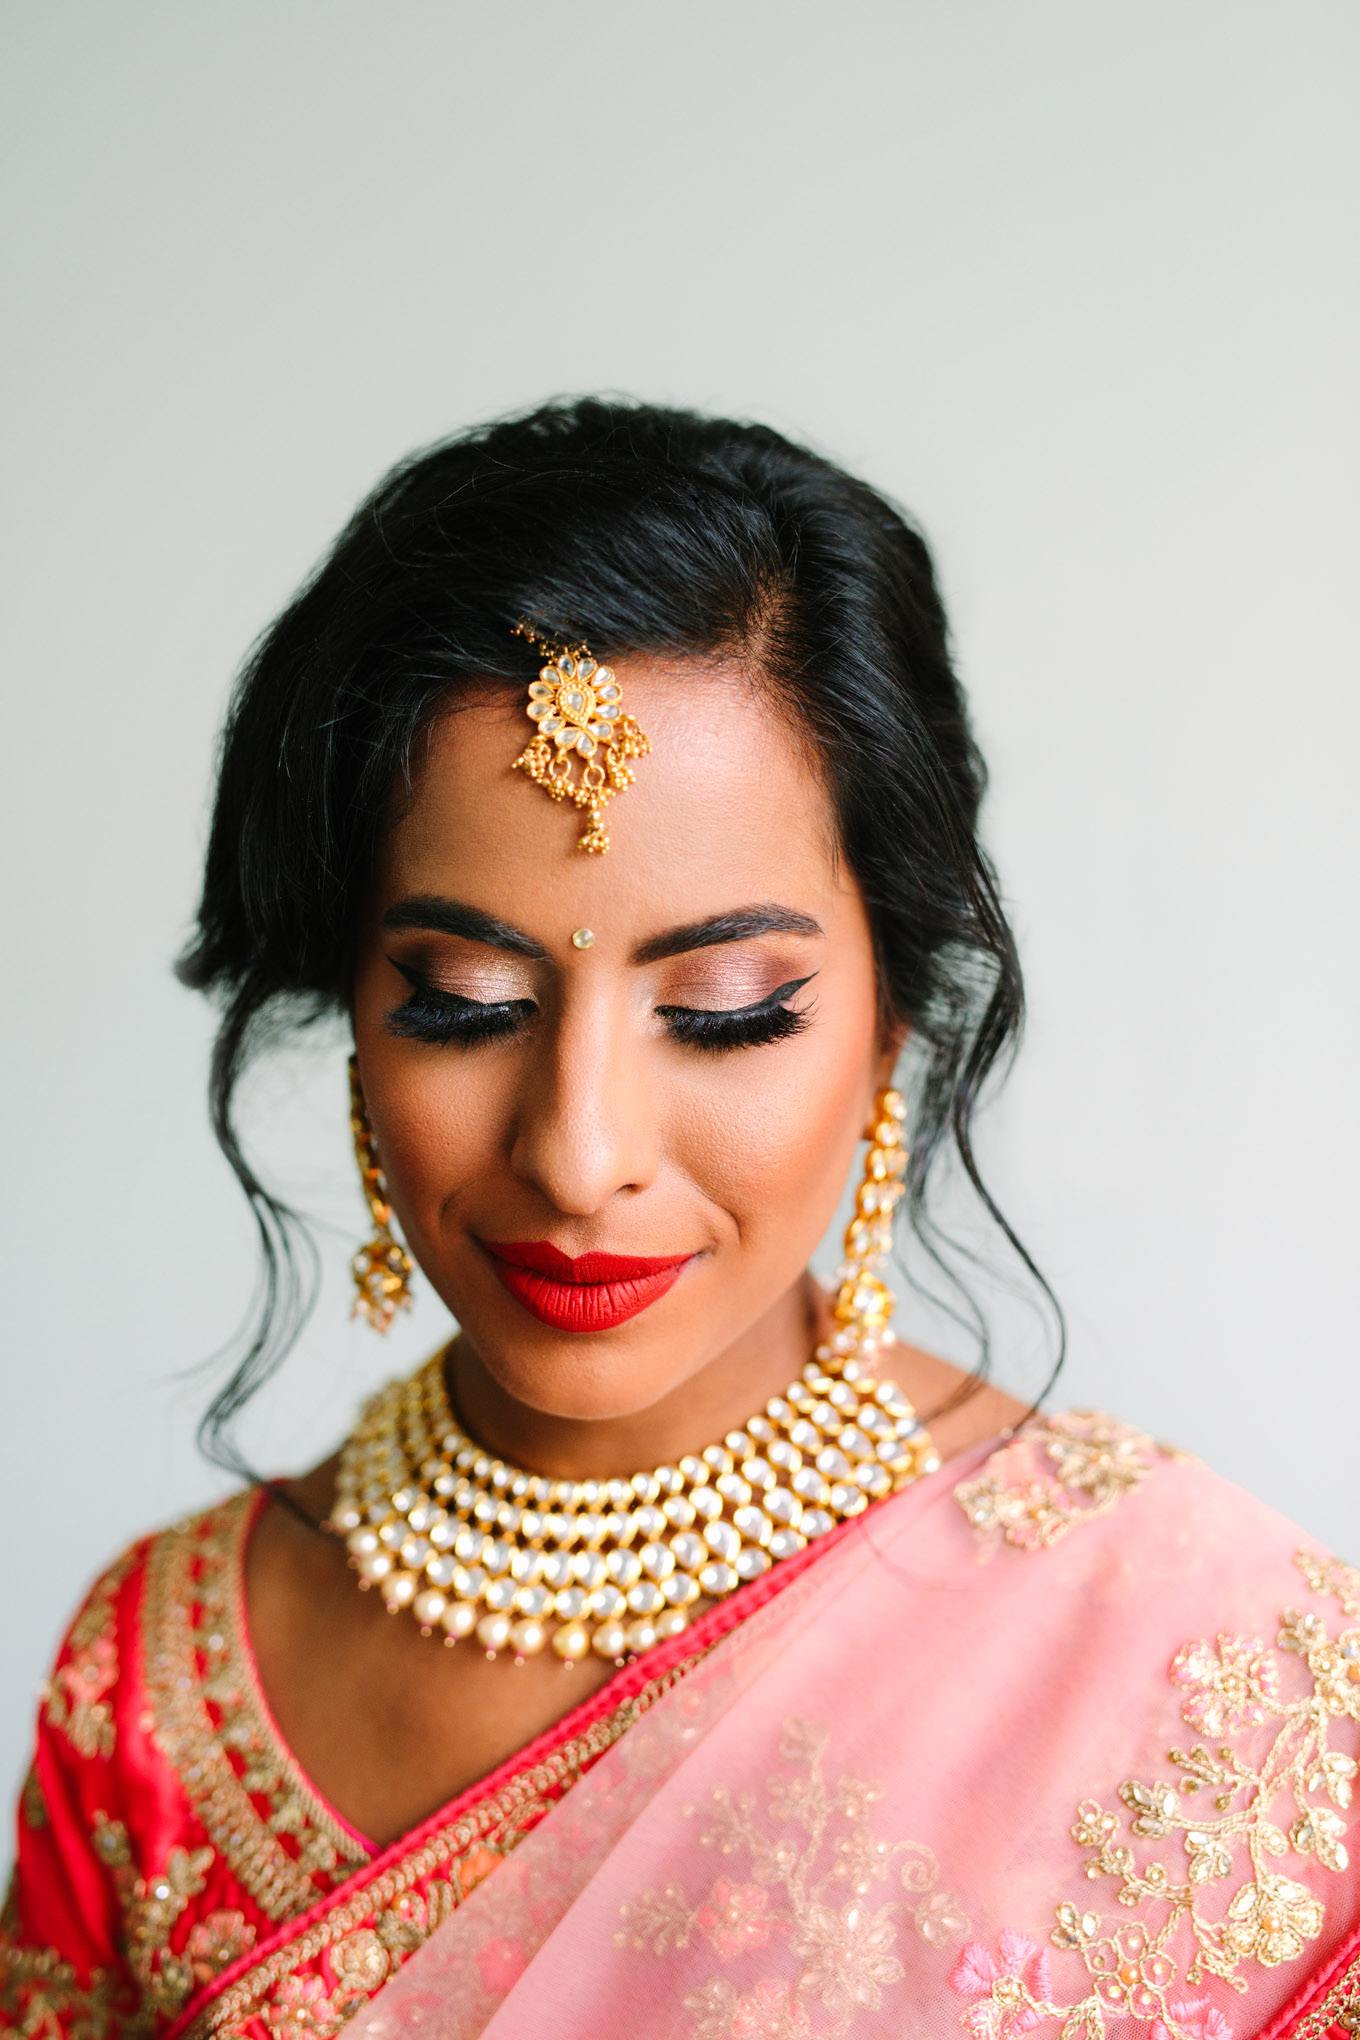 Beautiful bride in bright red lipstick. Two Disney artists create a unique and colorful Indian Fusion wedding at The Fig House Los Angeles, featured on Green Wedding Shoes. | Colorful and elevated wedding inspiration for fun-loving couples in Southern California | #indianwedding #indianfusionwedding #thefighouse #losangeleswedding   Source: Mary Costa Photography | Los Angeles